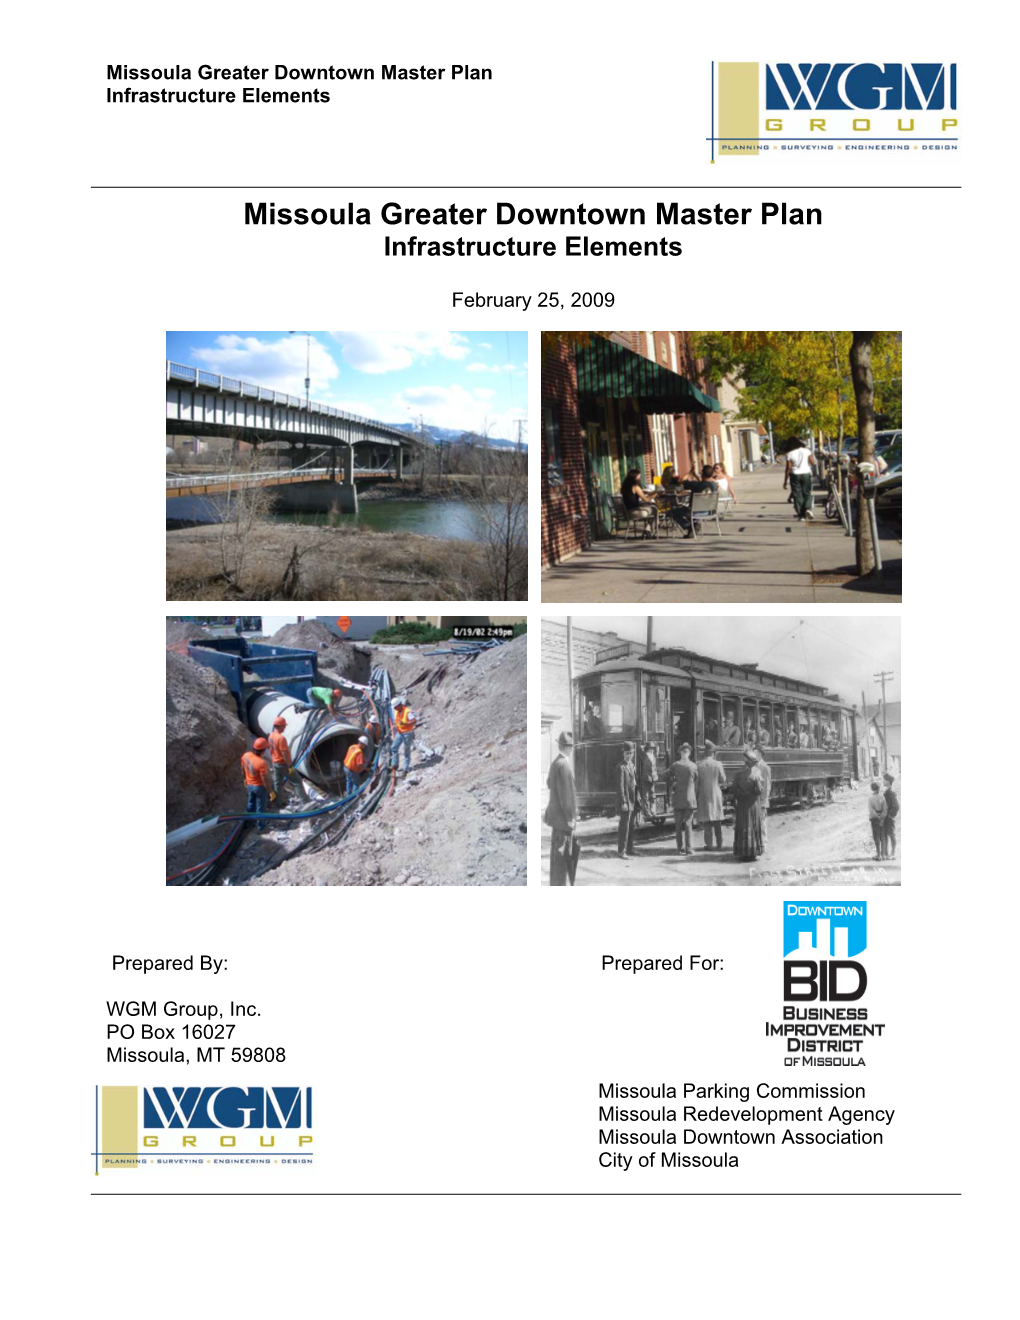 Missoula Greater Downtown Master Plan Infrastructure Elements